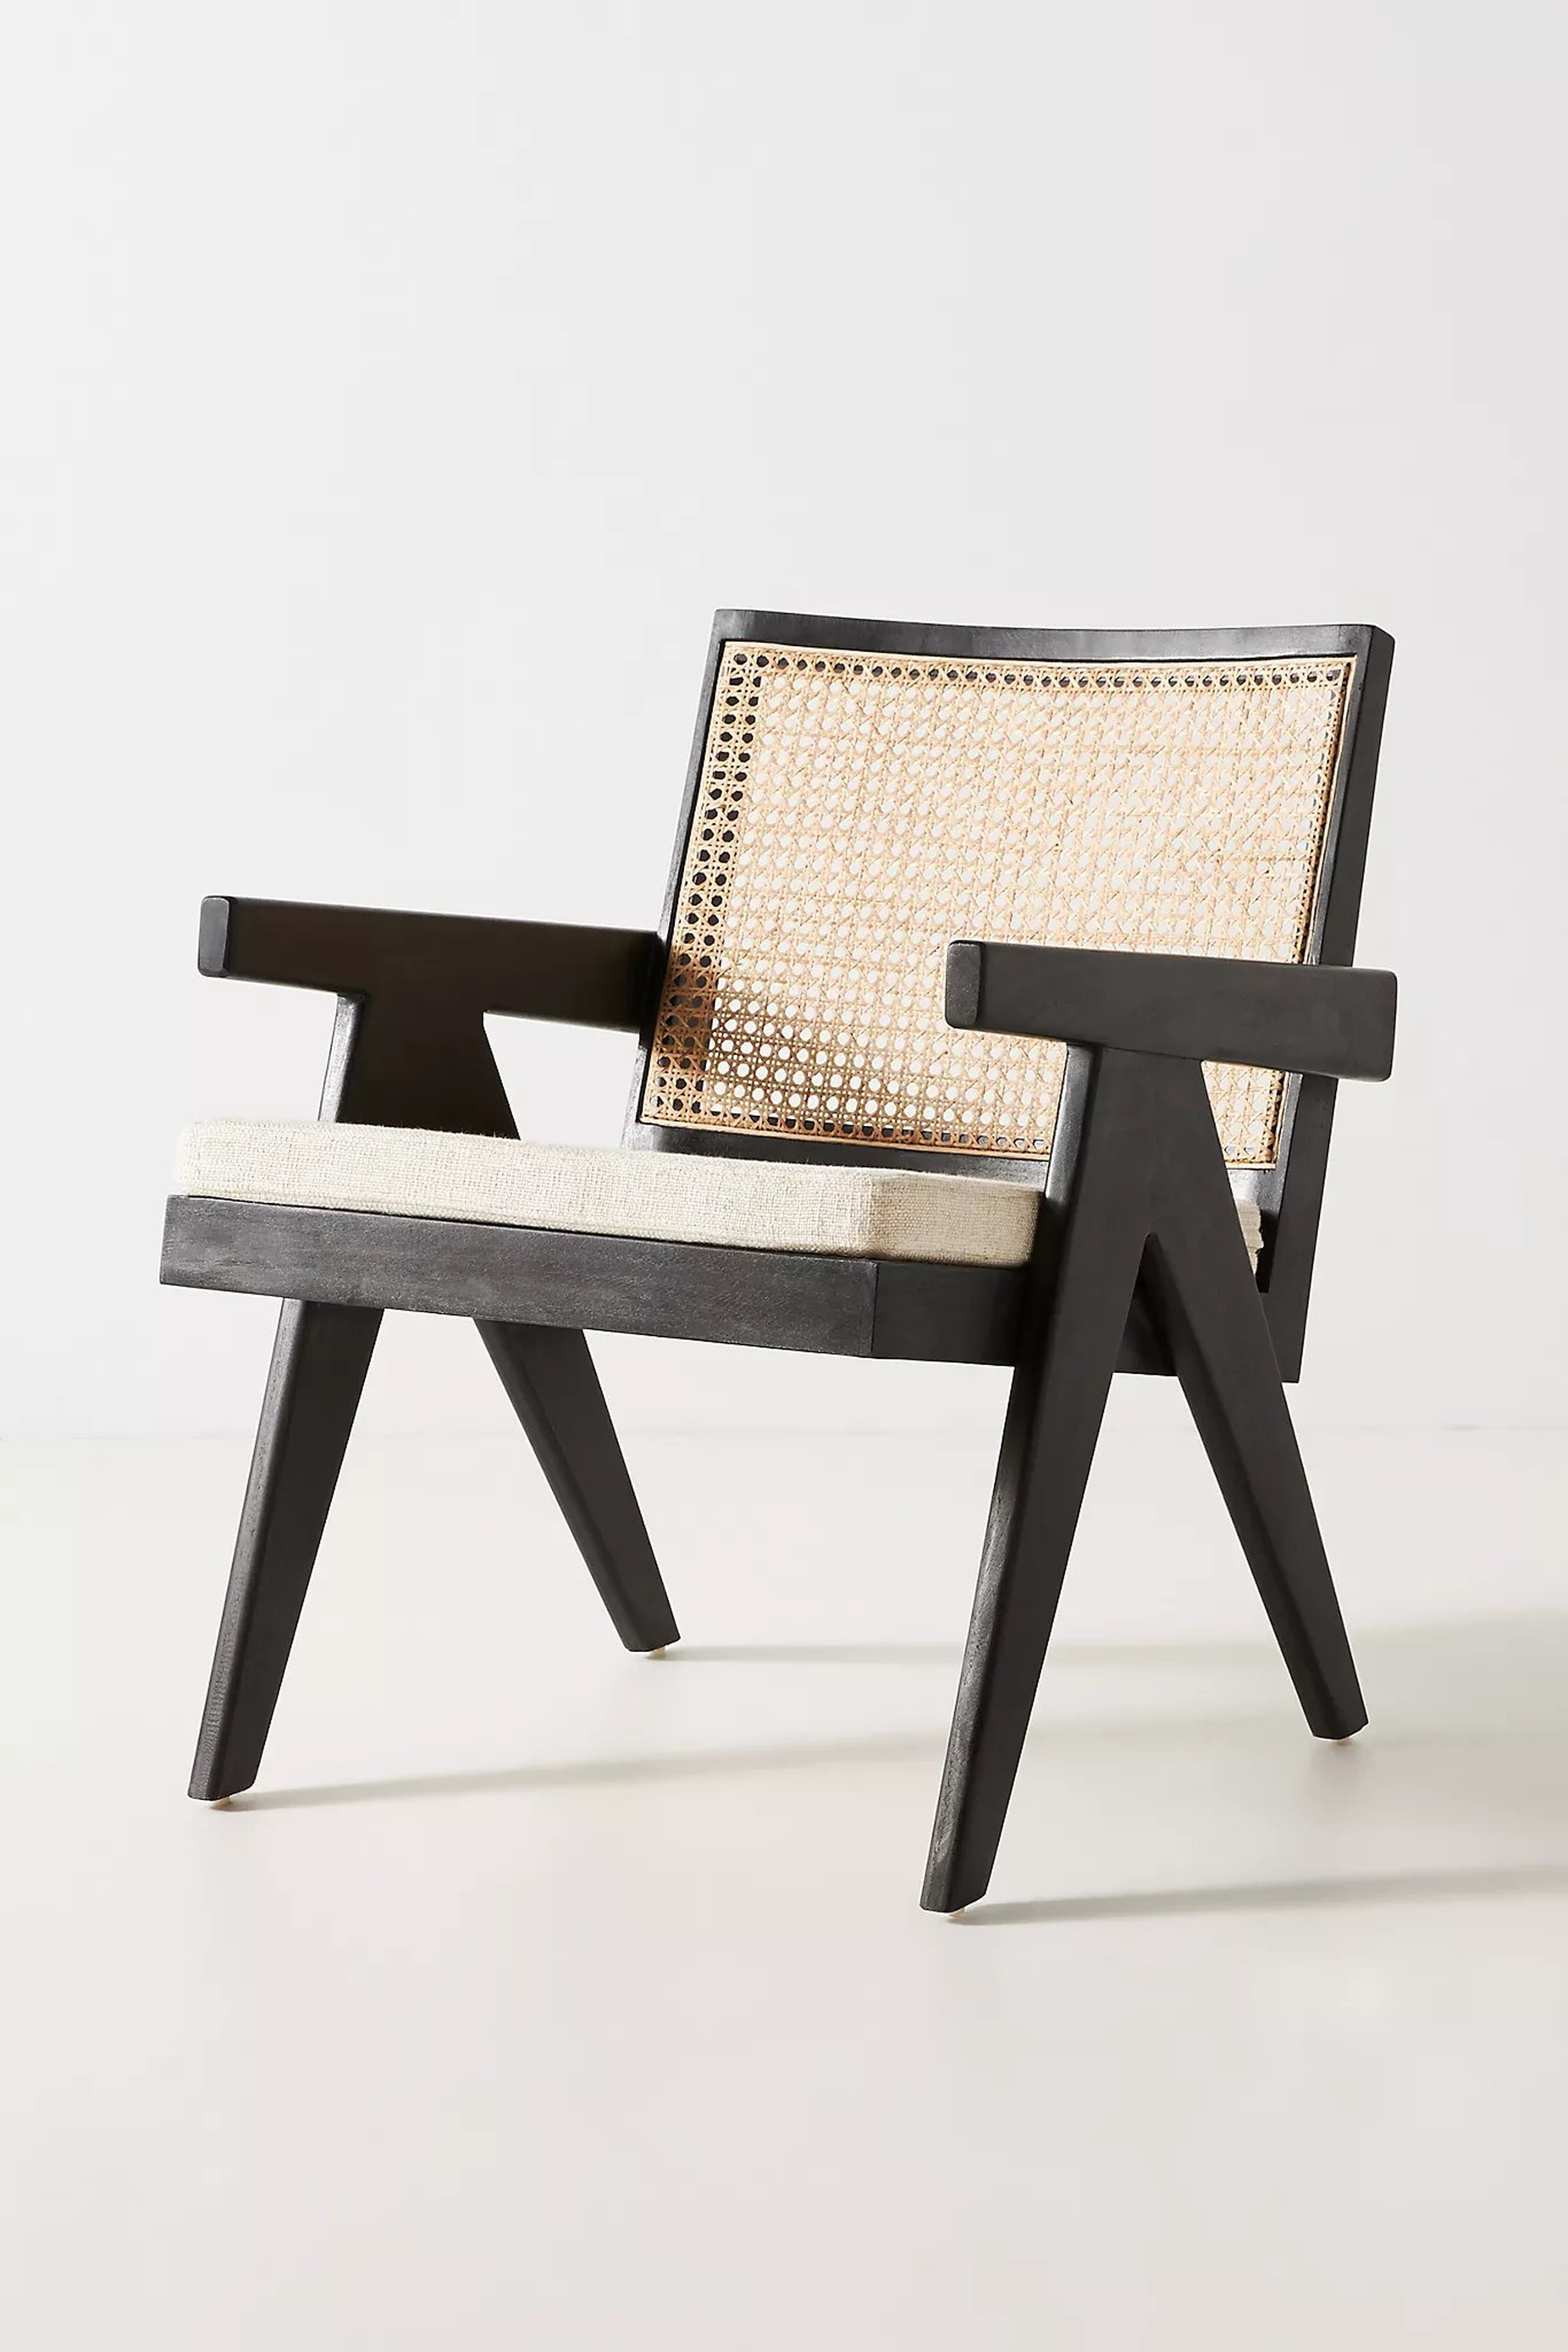 Ashton Caned Accent Chair By Anthropologie in Black - Anthropologie